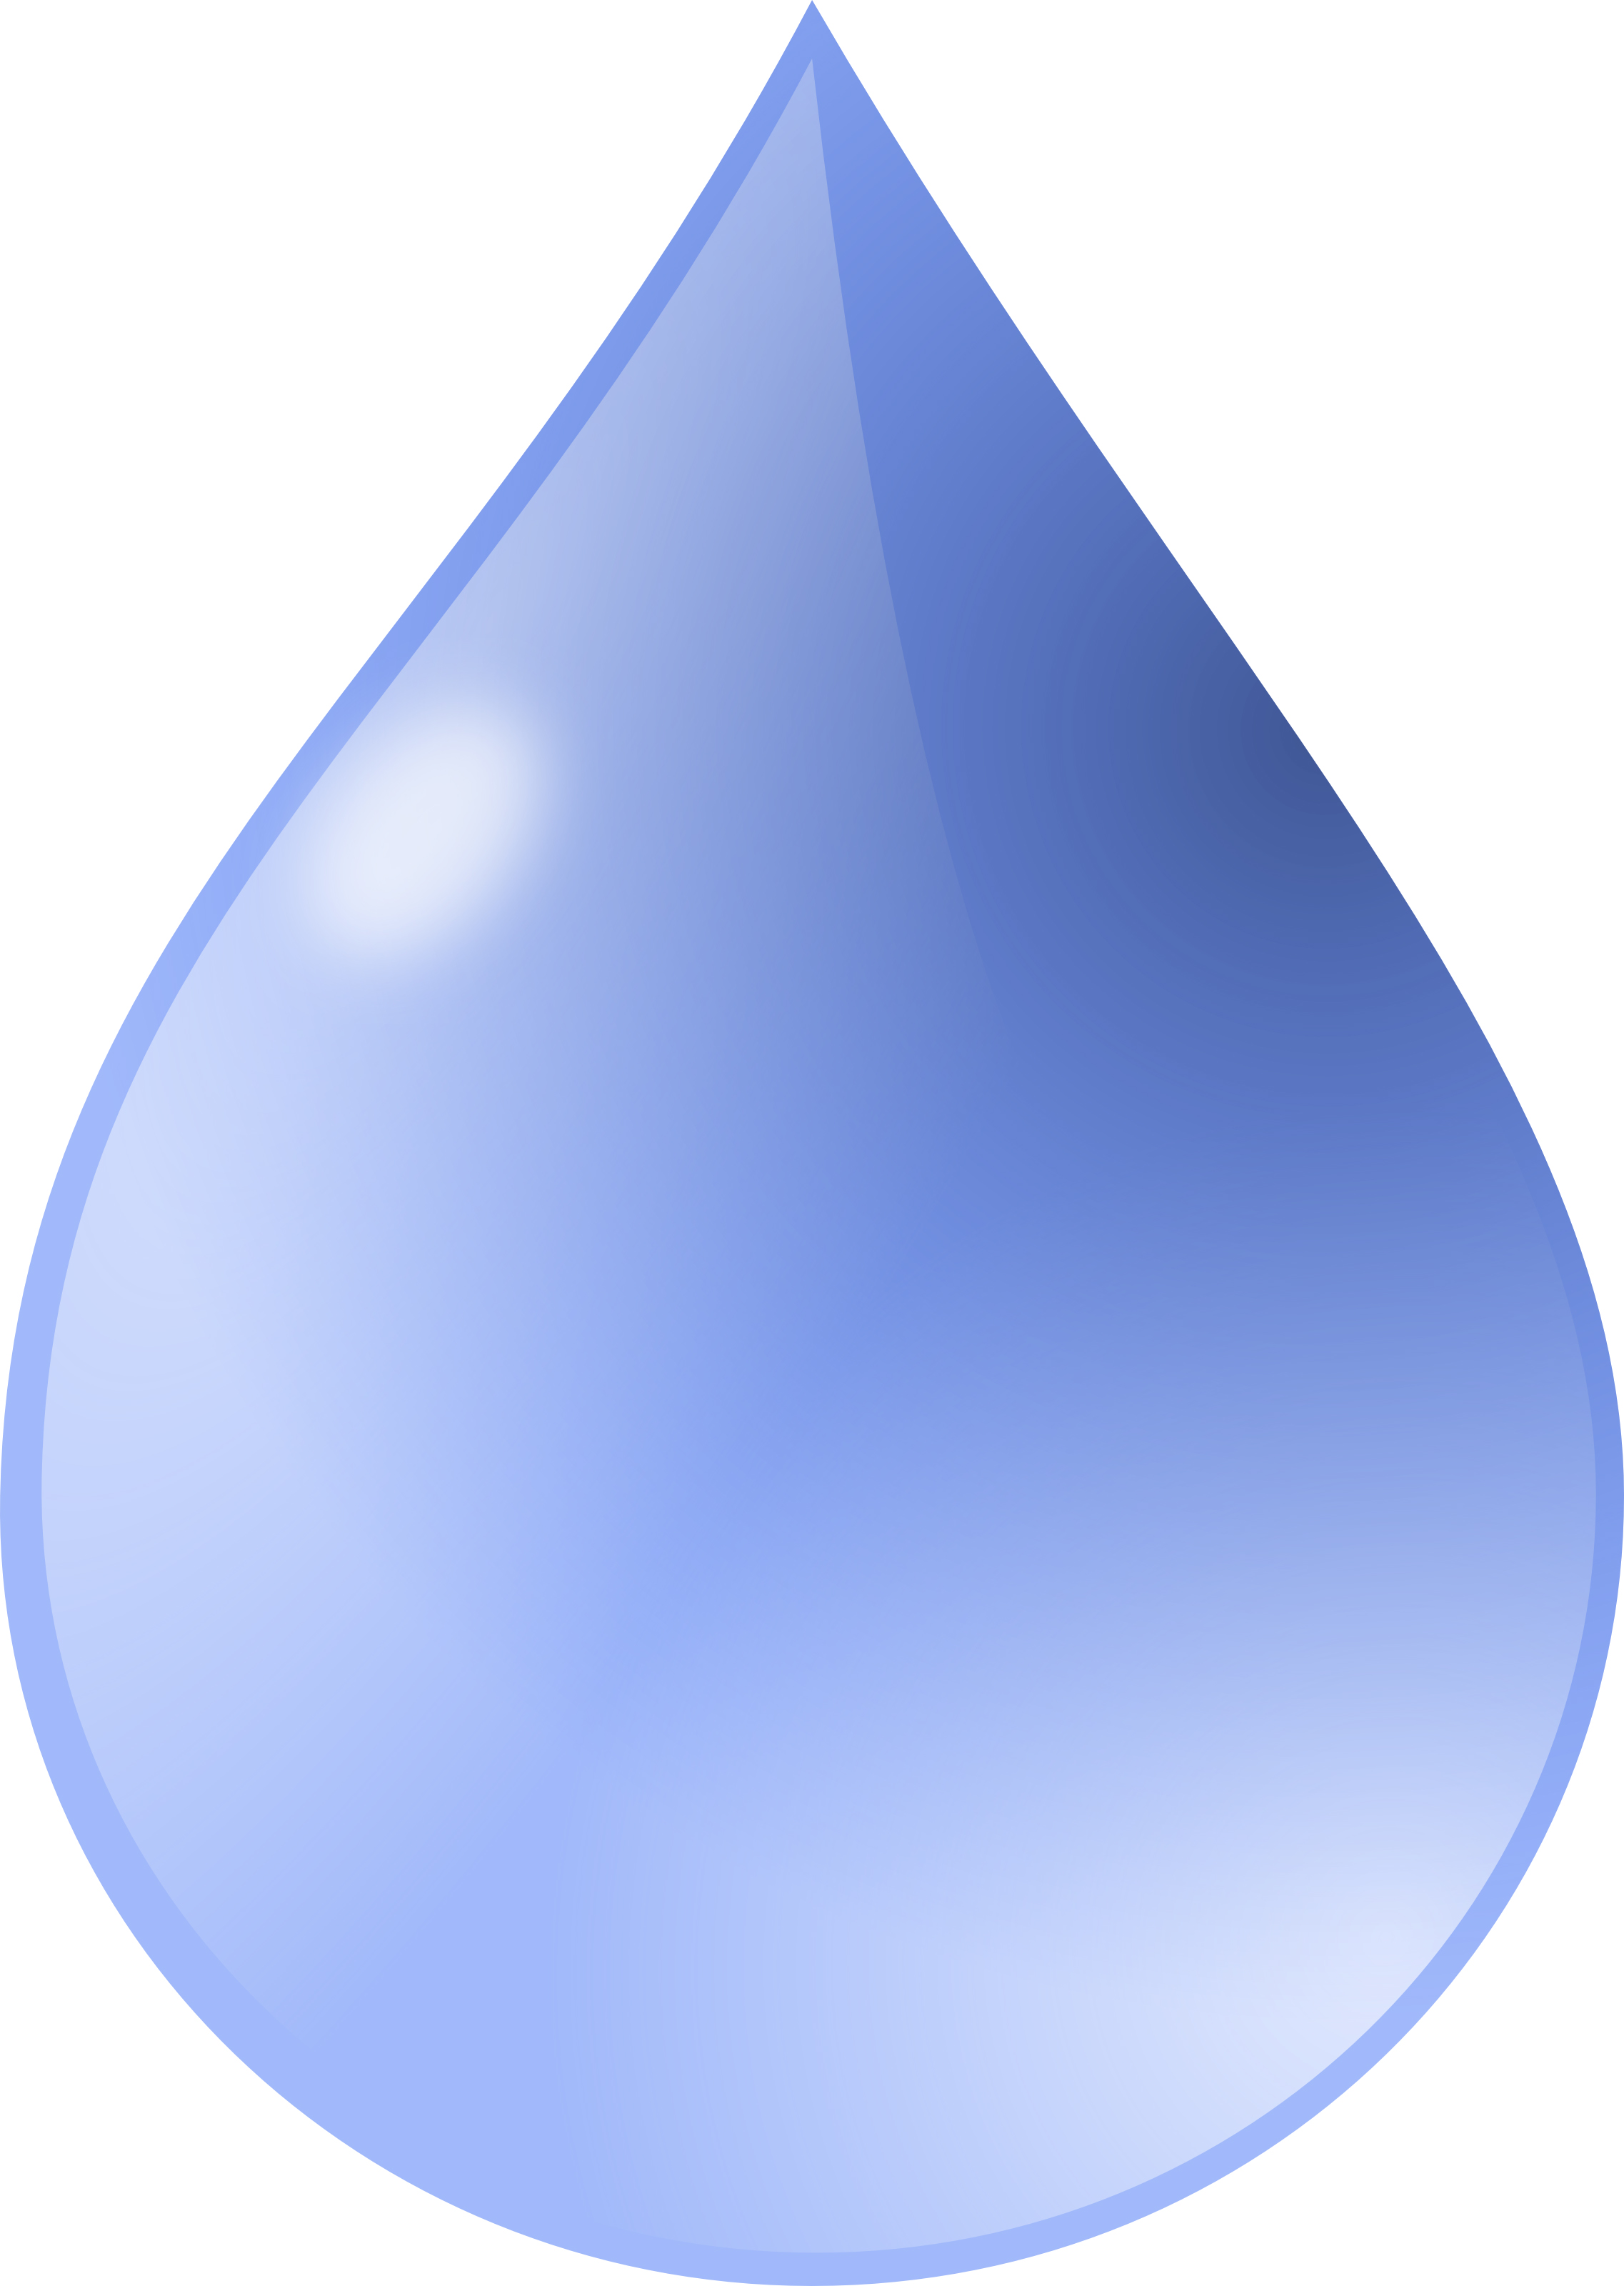 Free Water Drop Clipart Illustration by 000162 .